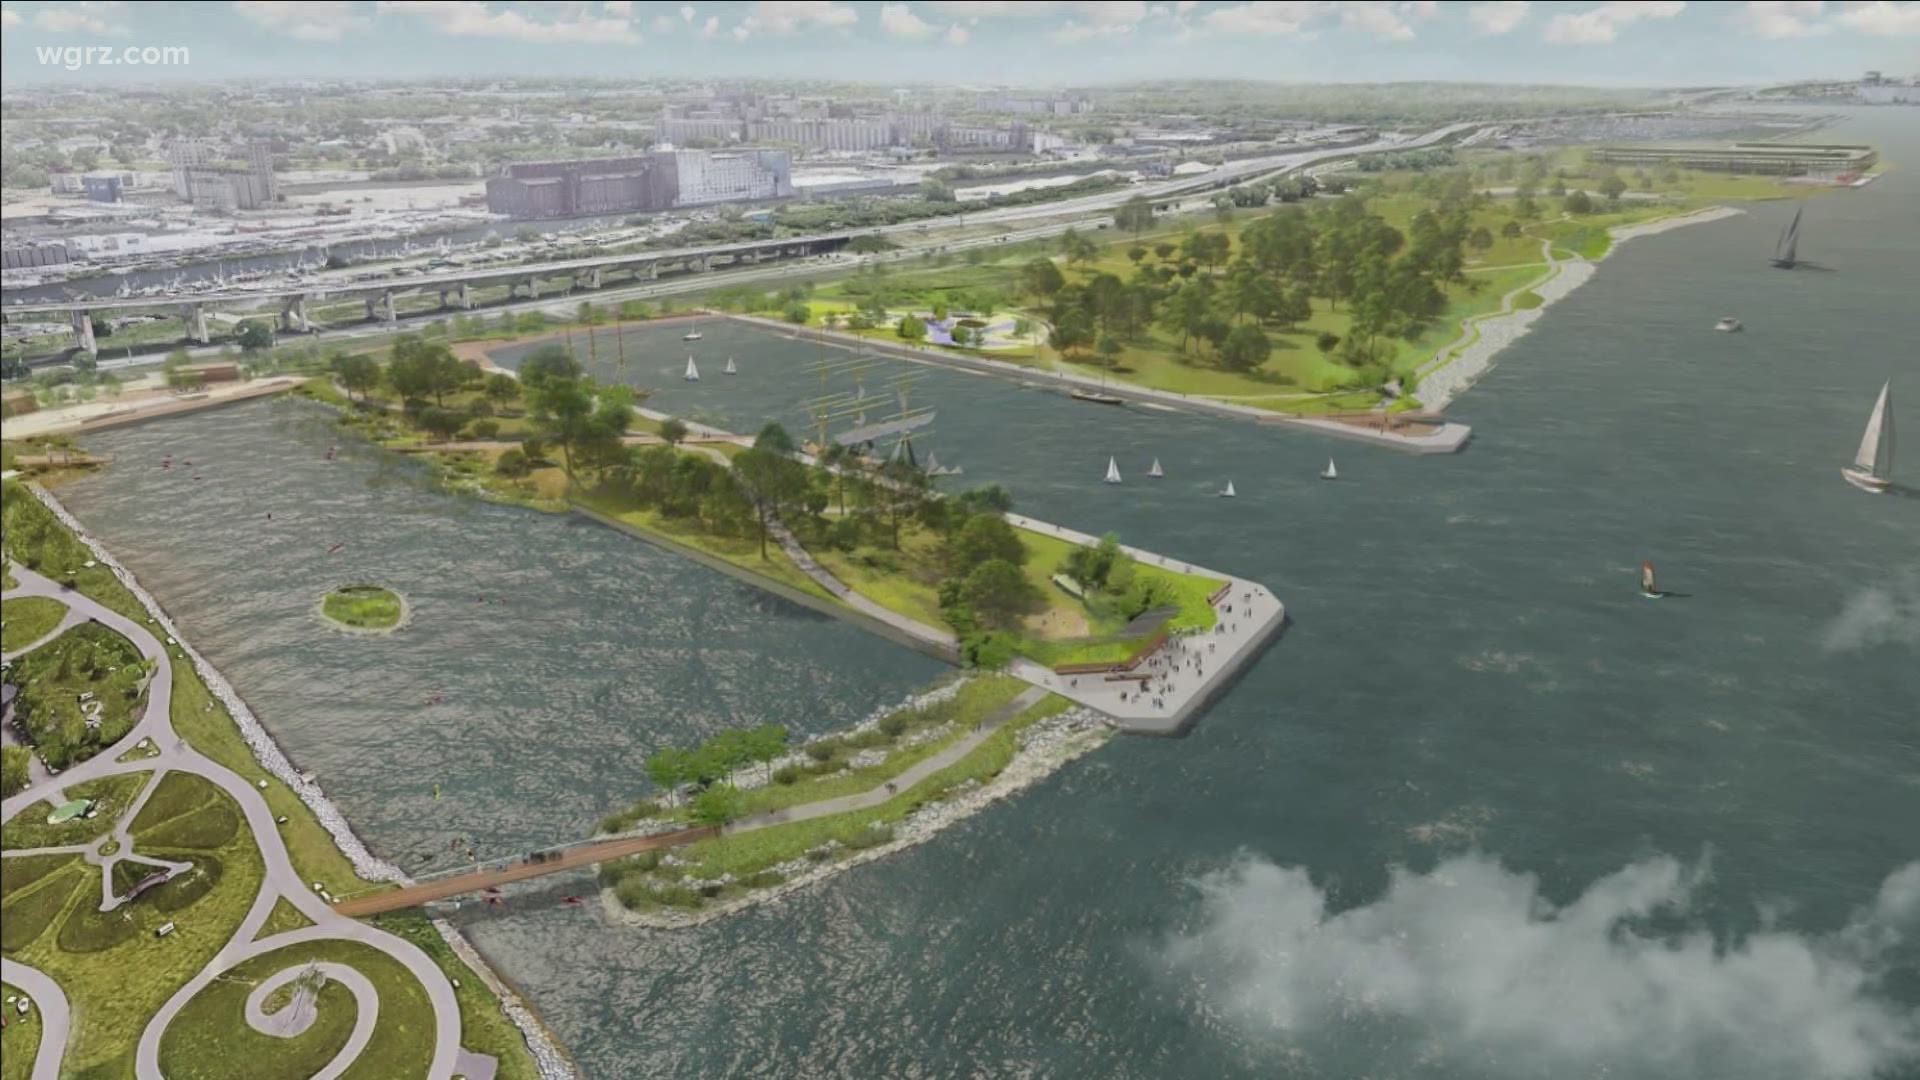 Improvements Coming To Buffalo's Outer Harbor